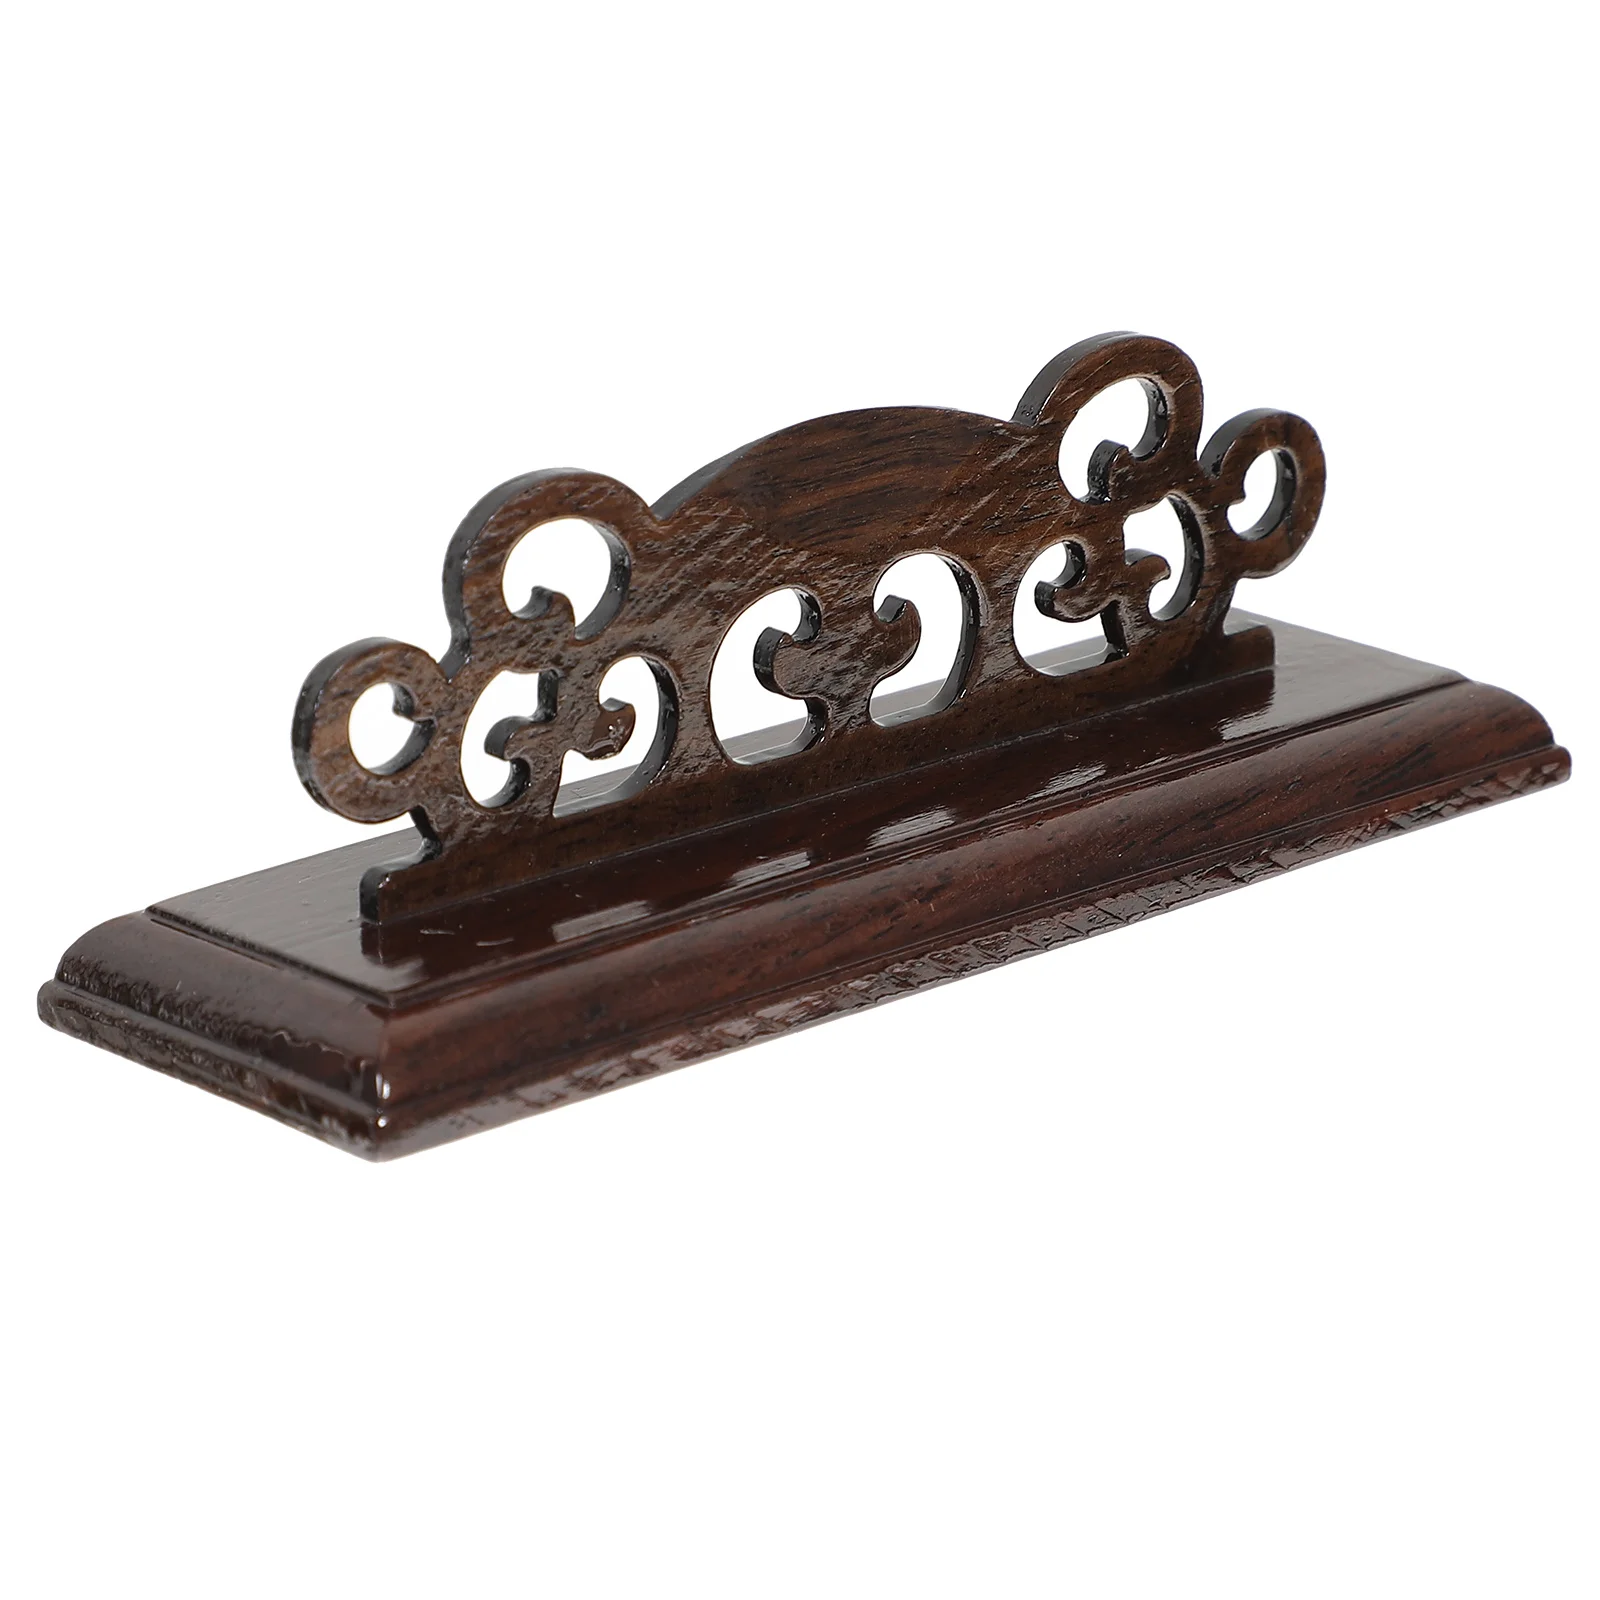 

Fan Display Stand Holder Fans Base Traditional Hand Held Chinese Rack Folding Wooden Fashioned Stands